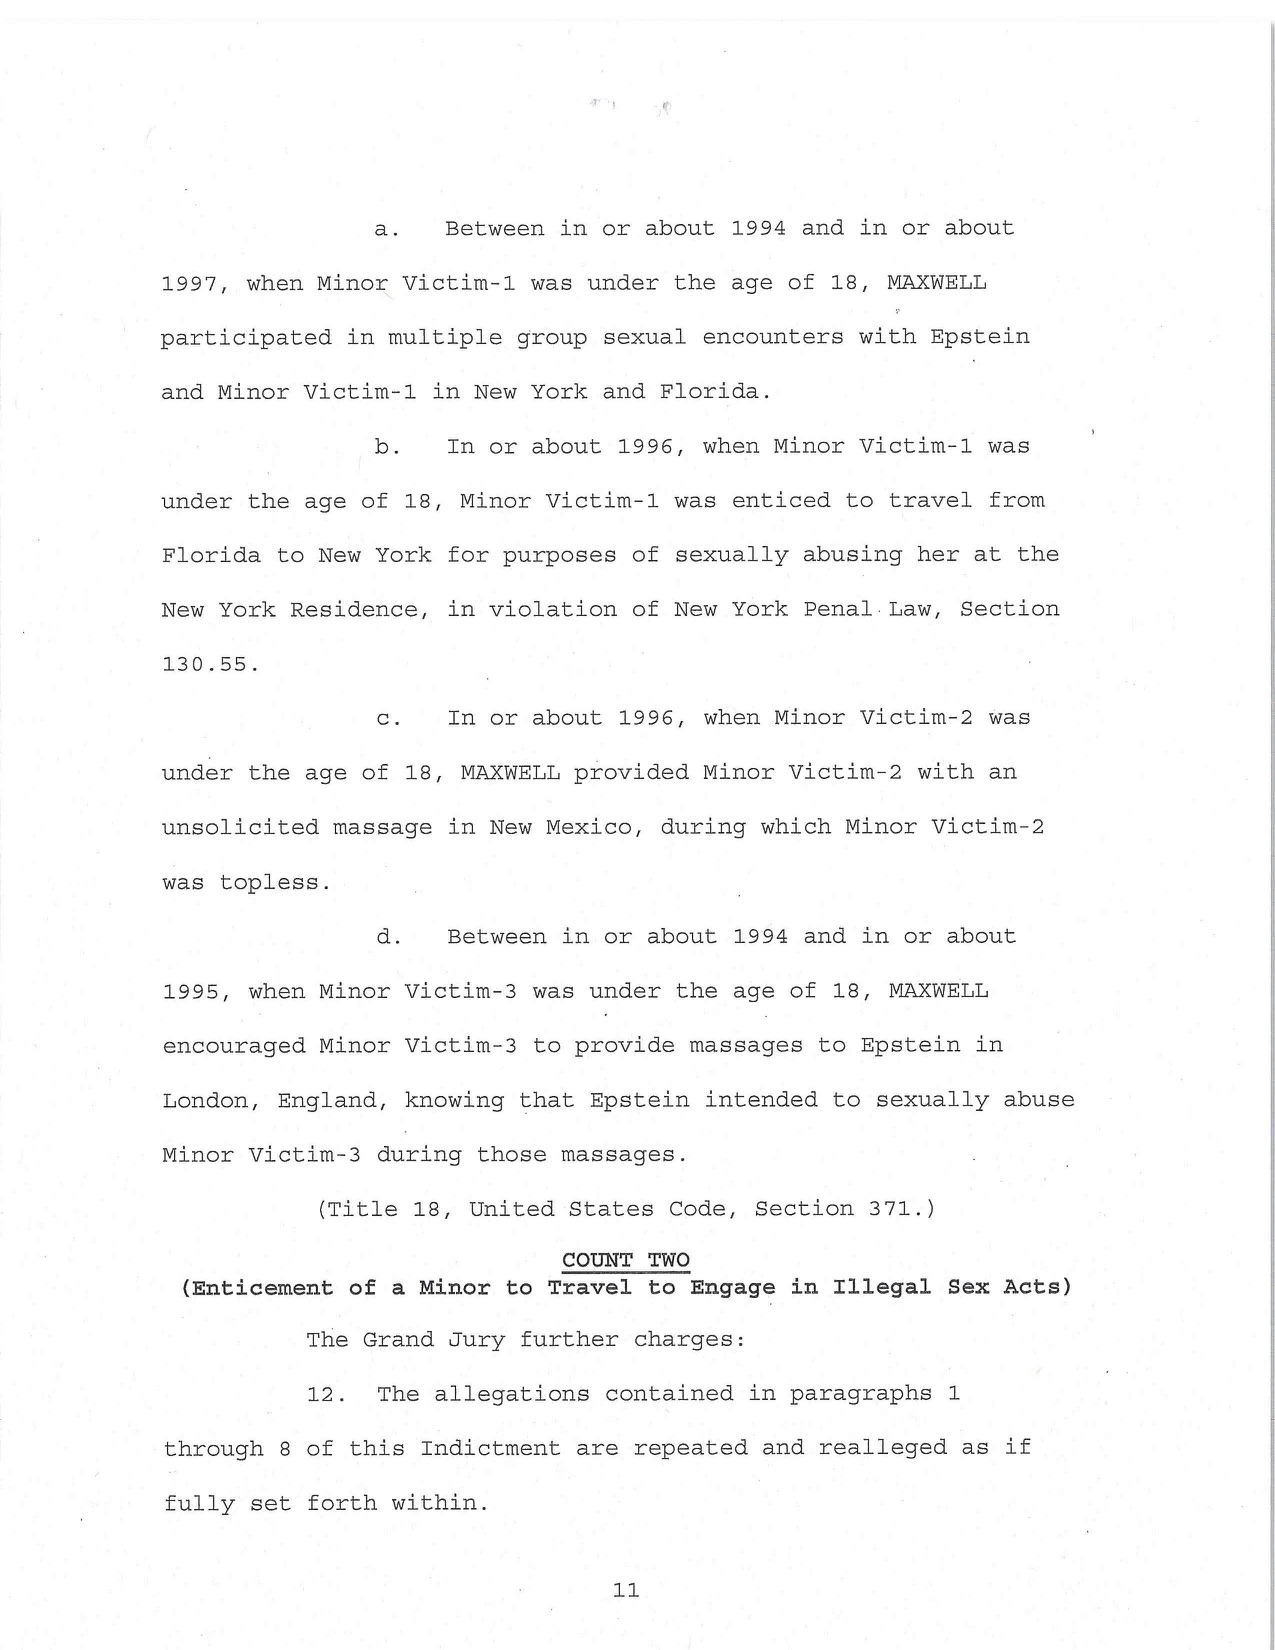 The United States vs Ghislaine Maxwell - Between in or about 1994 and in or about 1997, when Minor Victim1 was under the age of 18, Maxwell participated in multiple group sexual encounters with Epstein and Minor Victim1 in New York and Florida. b. In or a